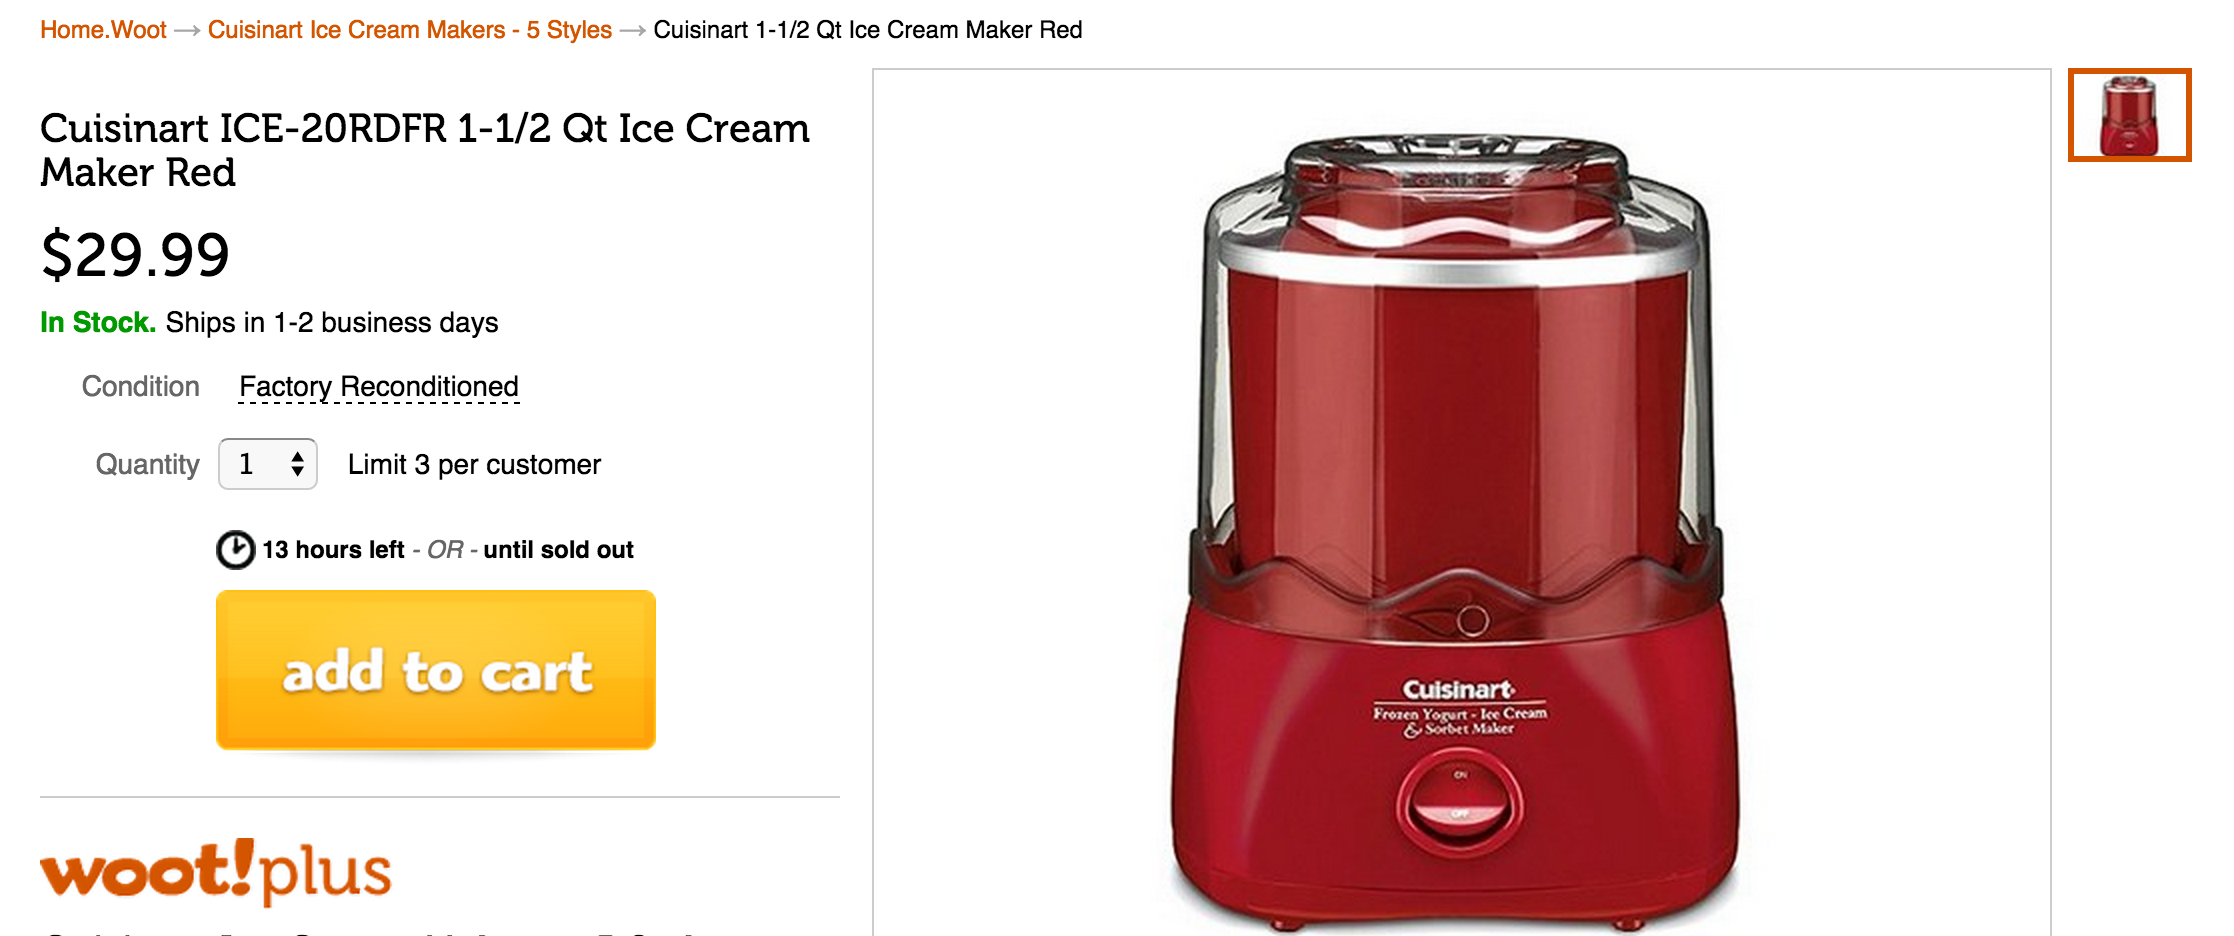 Up to 70% off Certified Refurbished Cuisinart 2 QT Ice Cream Maker (ICE -30BCFR)